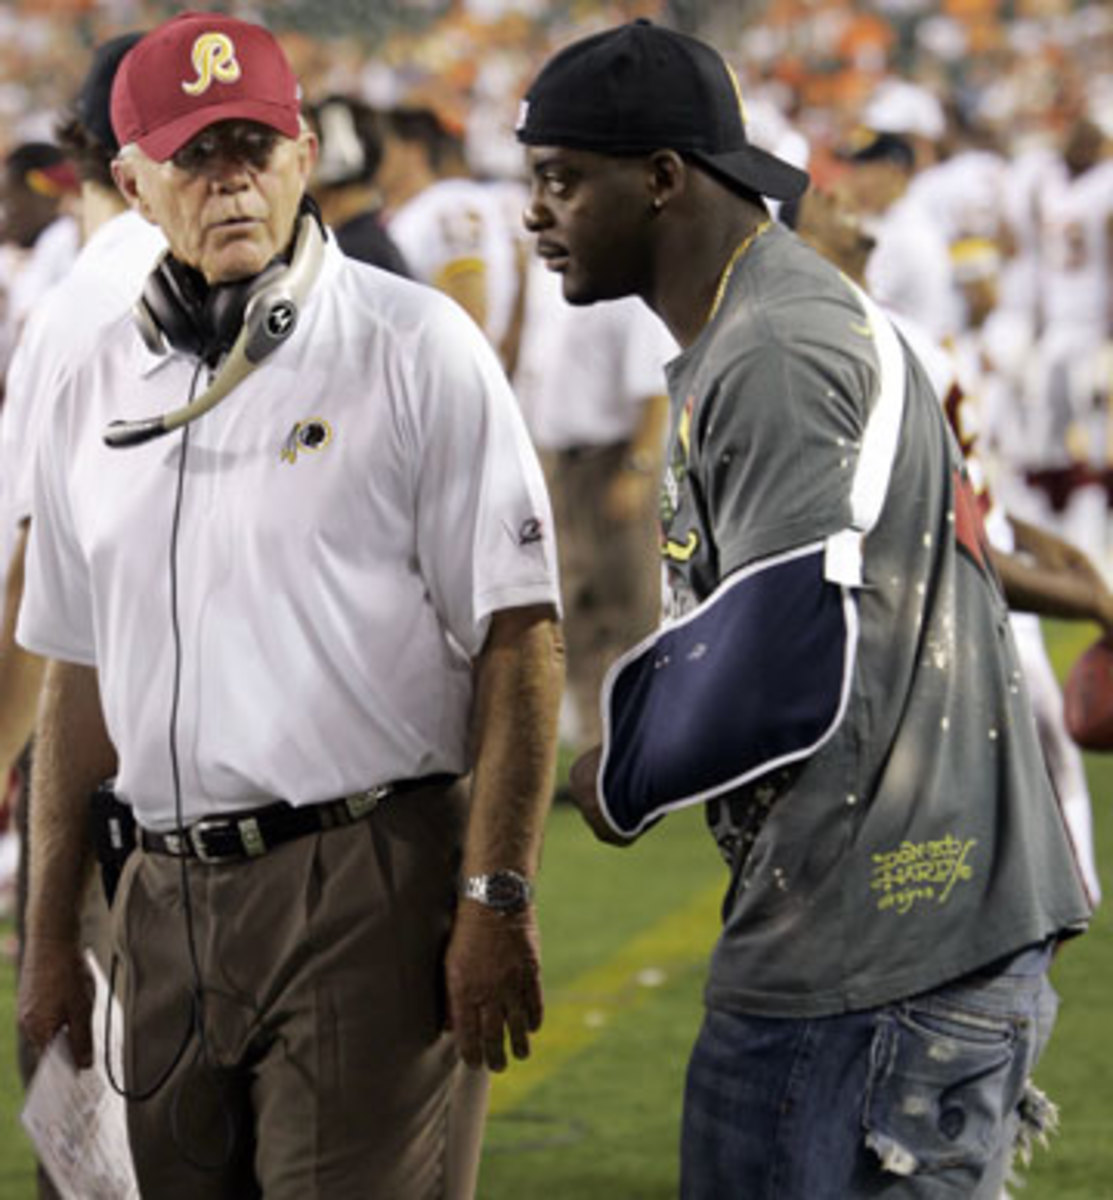 Portis wore a sling after dislocating his shoulder in Washington's first preseason game in 2006, an injury that forced him to miss the first half of the season.